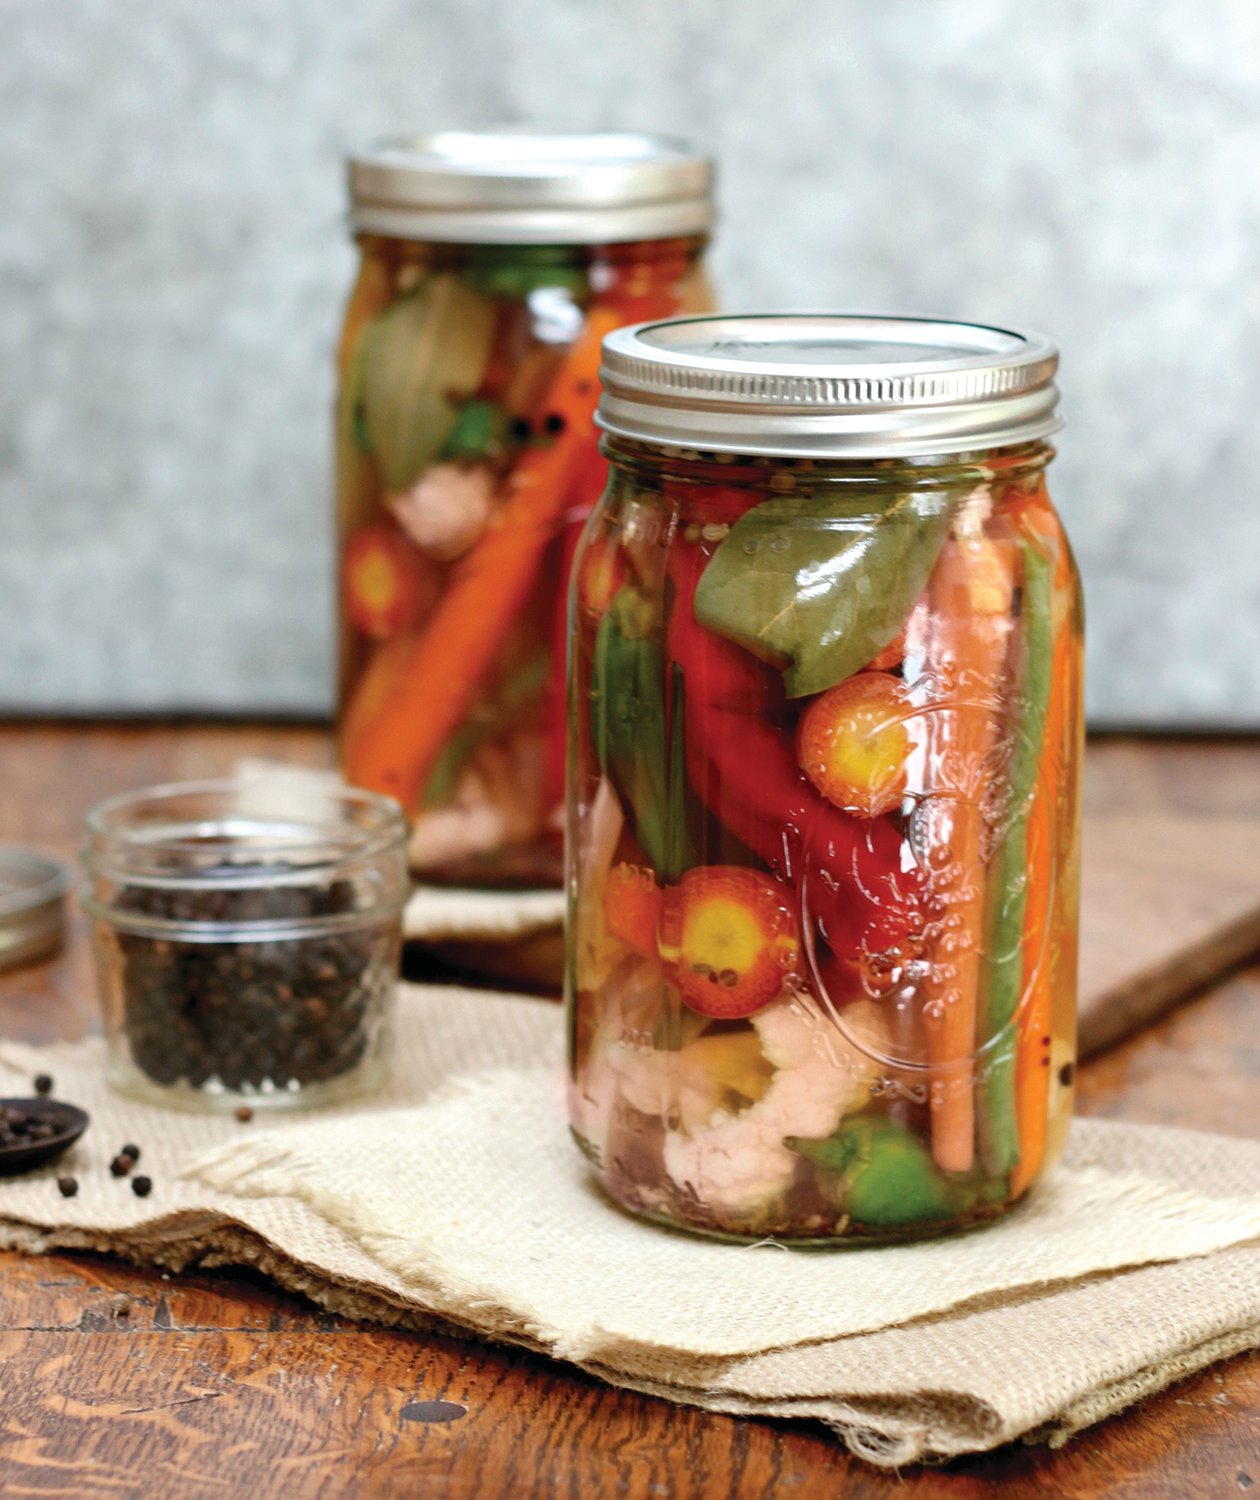 The advantage of quick-pickling is that the vegetables will keep their crunch, which is essential to a good pickle.